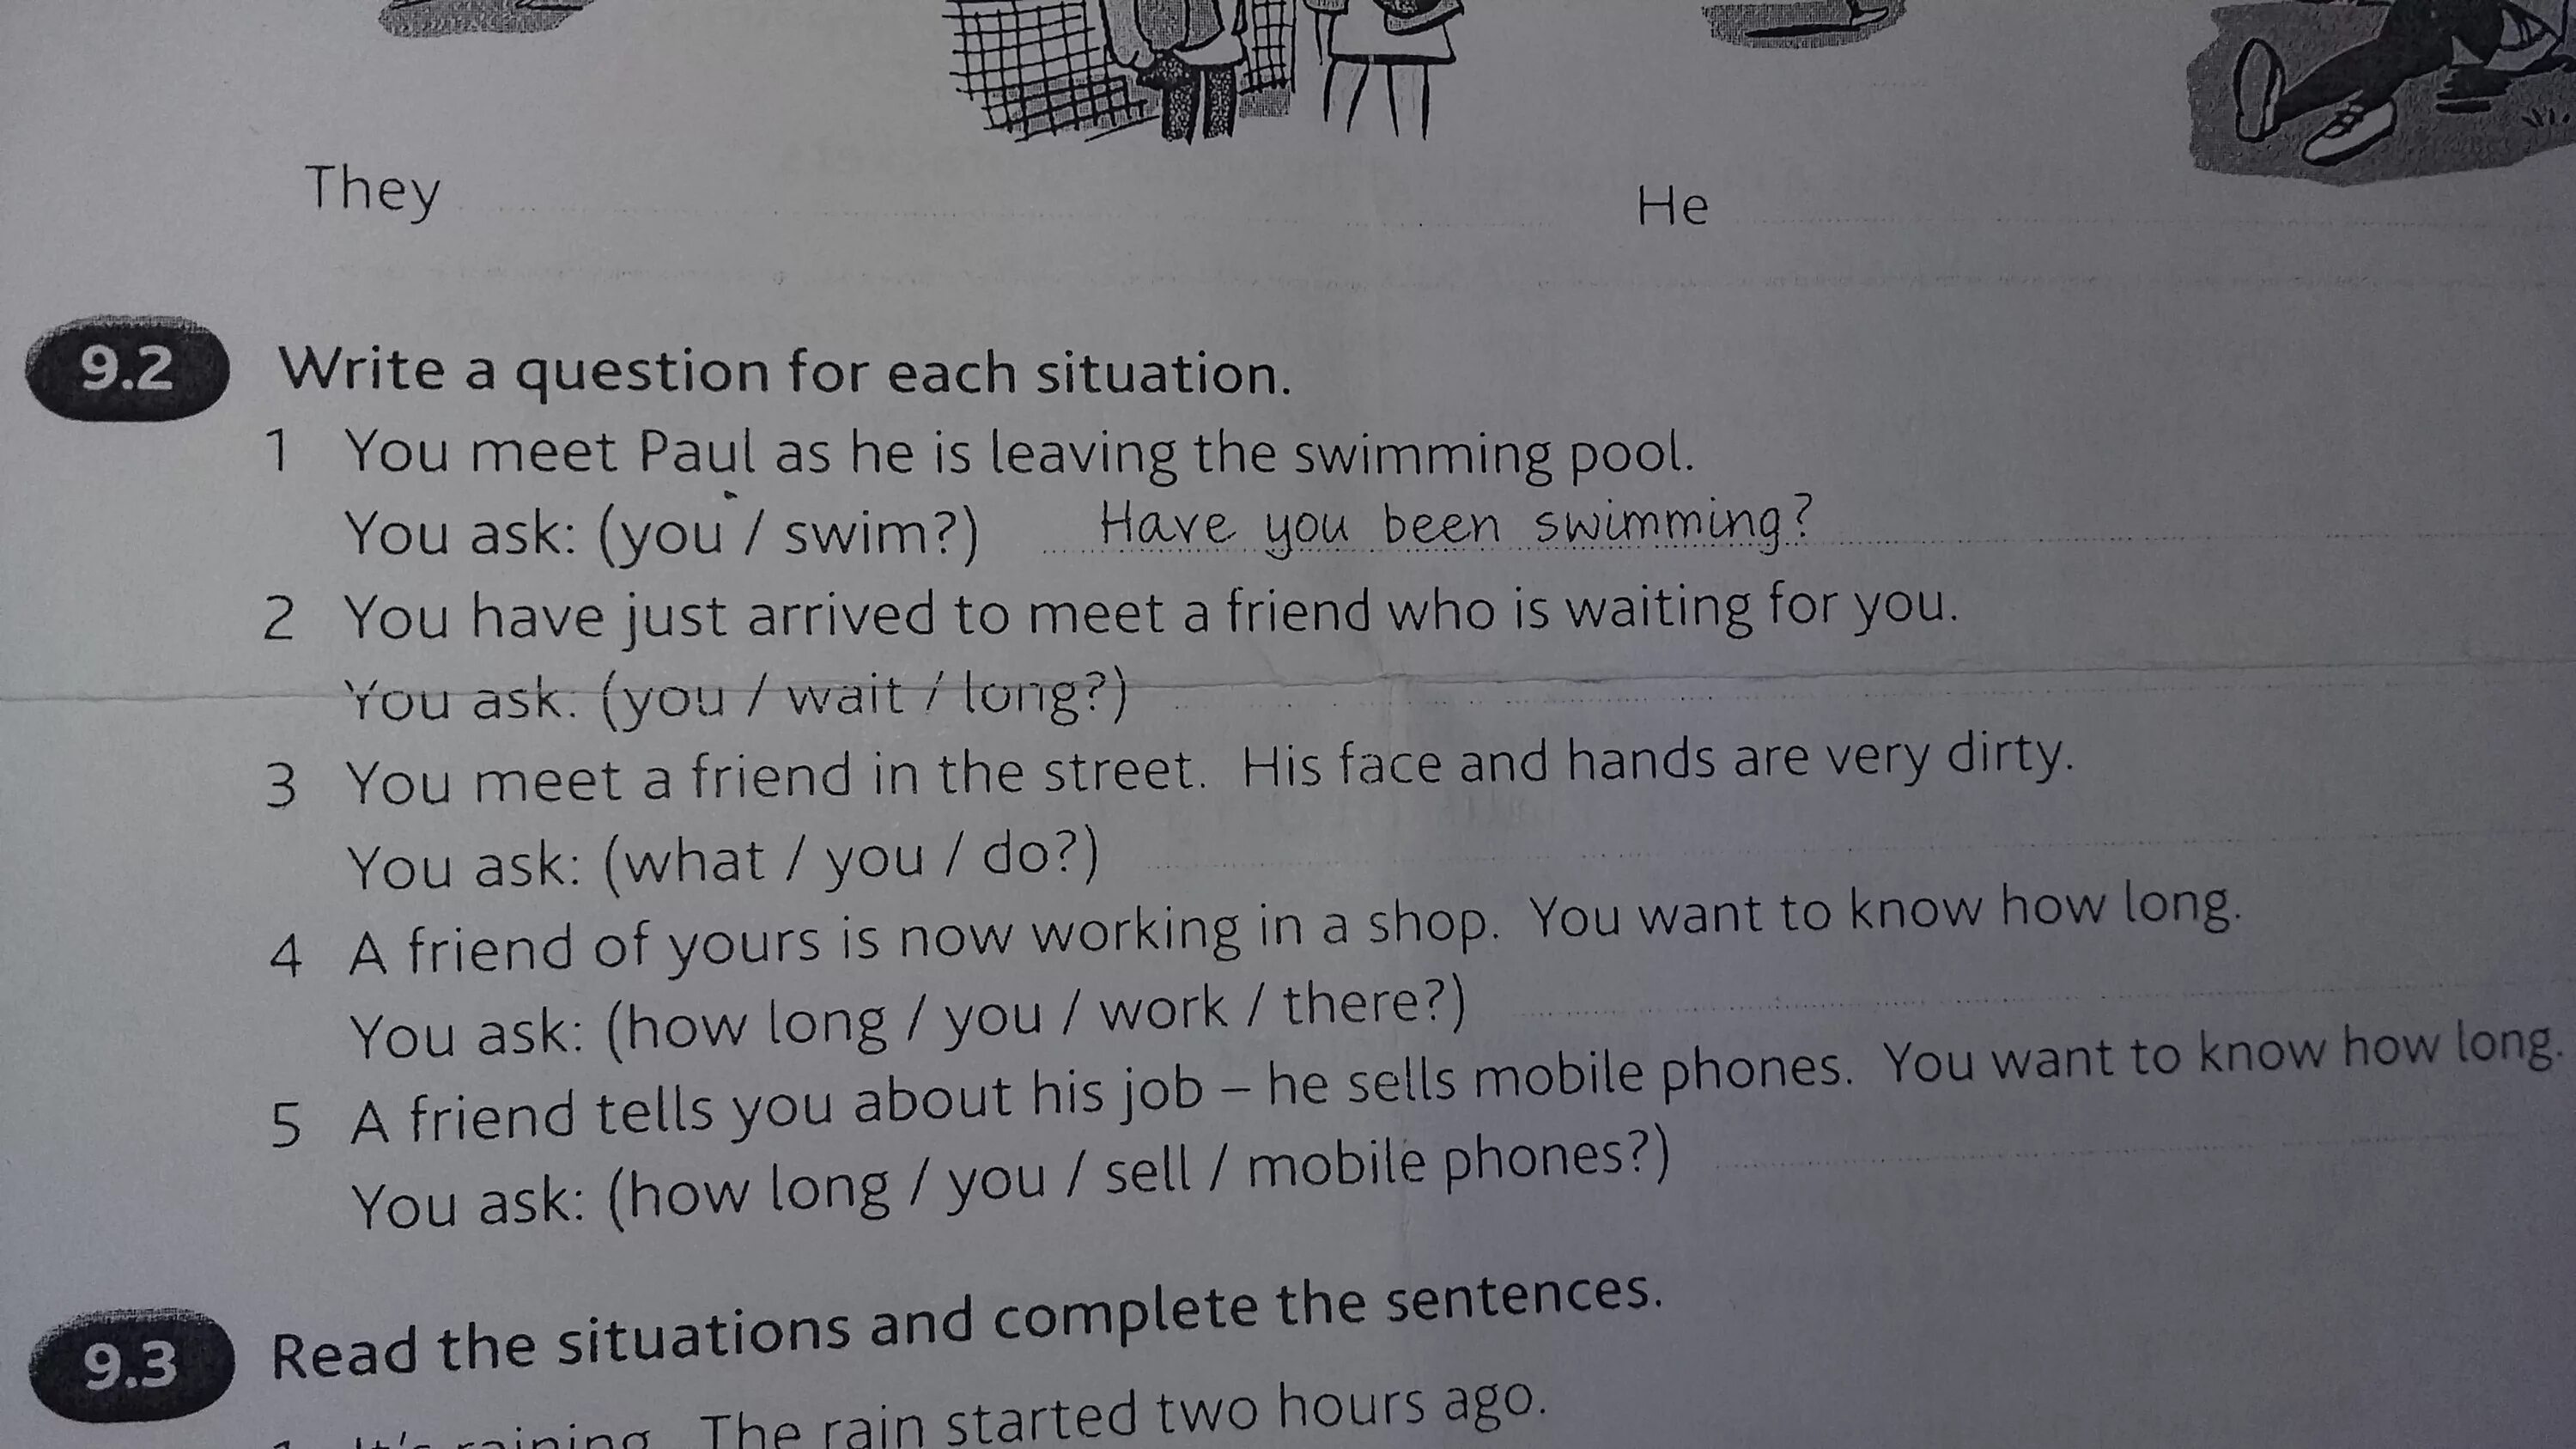 Write a question for each situation 9.2 ответы. Write a question for each situation. Учебник 9.2 written a question for each situation стр 19 ответы. Write a question with going to for each situation you meet Paul as he is. Write a sentence for each situation